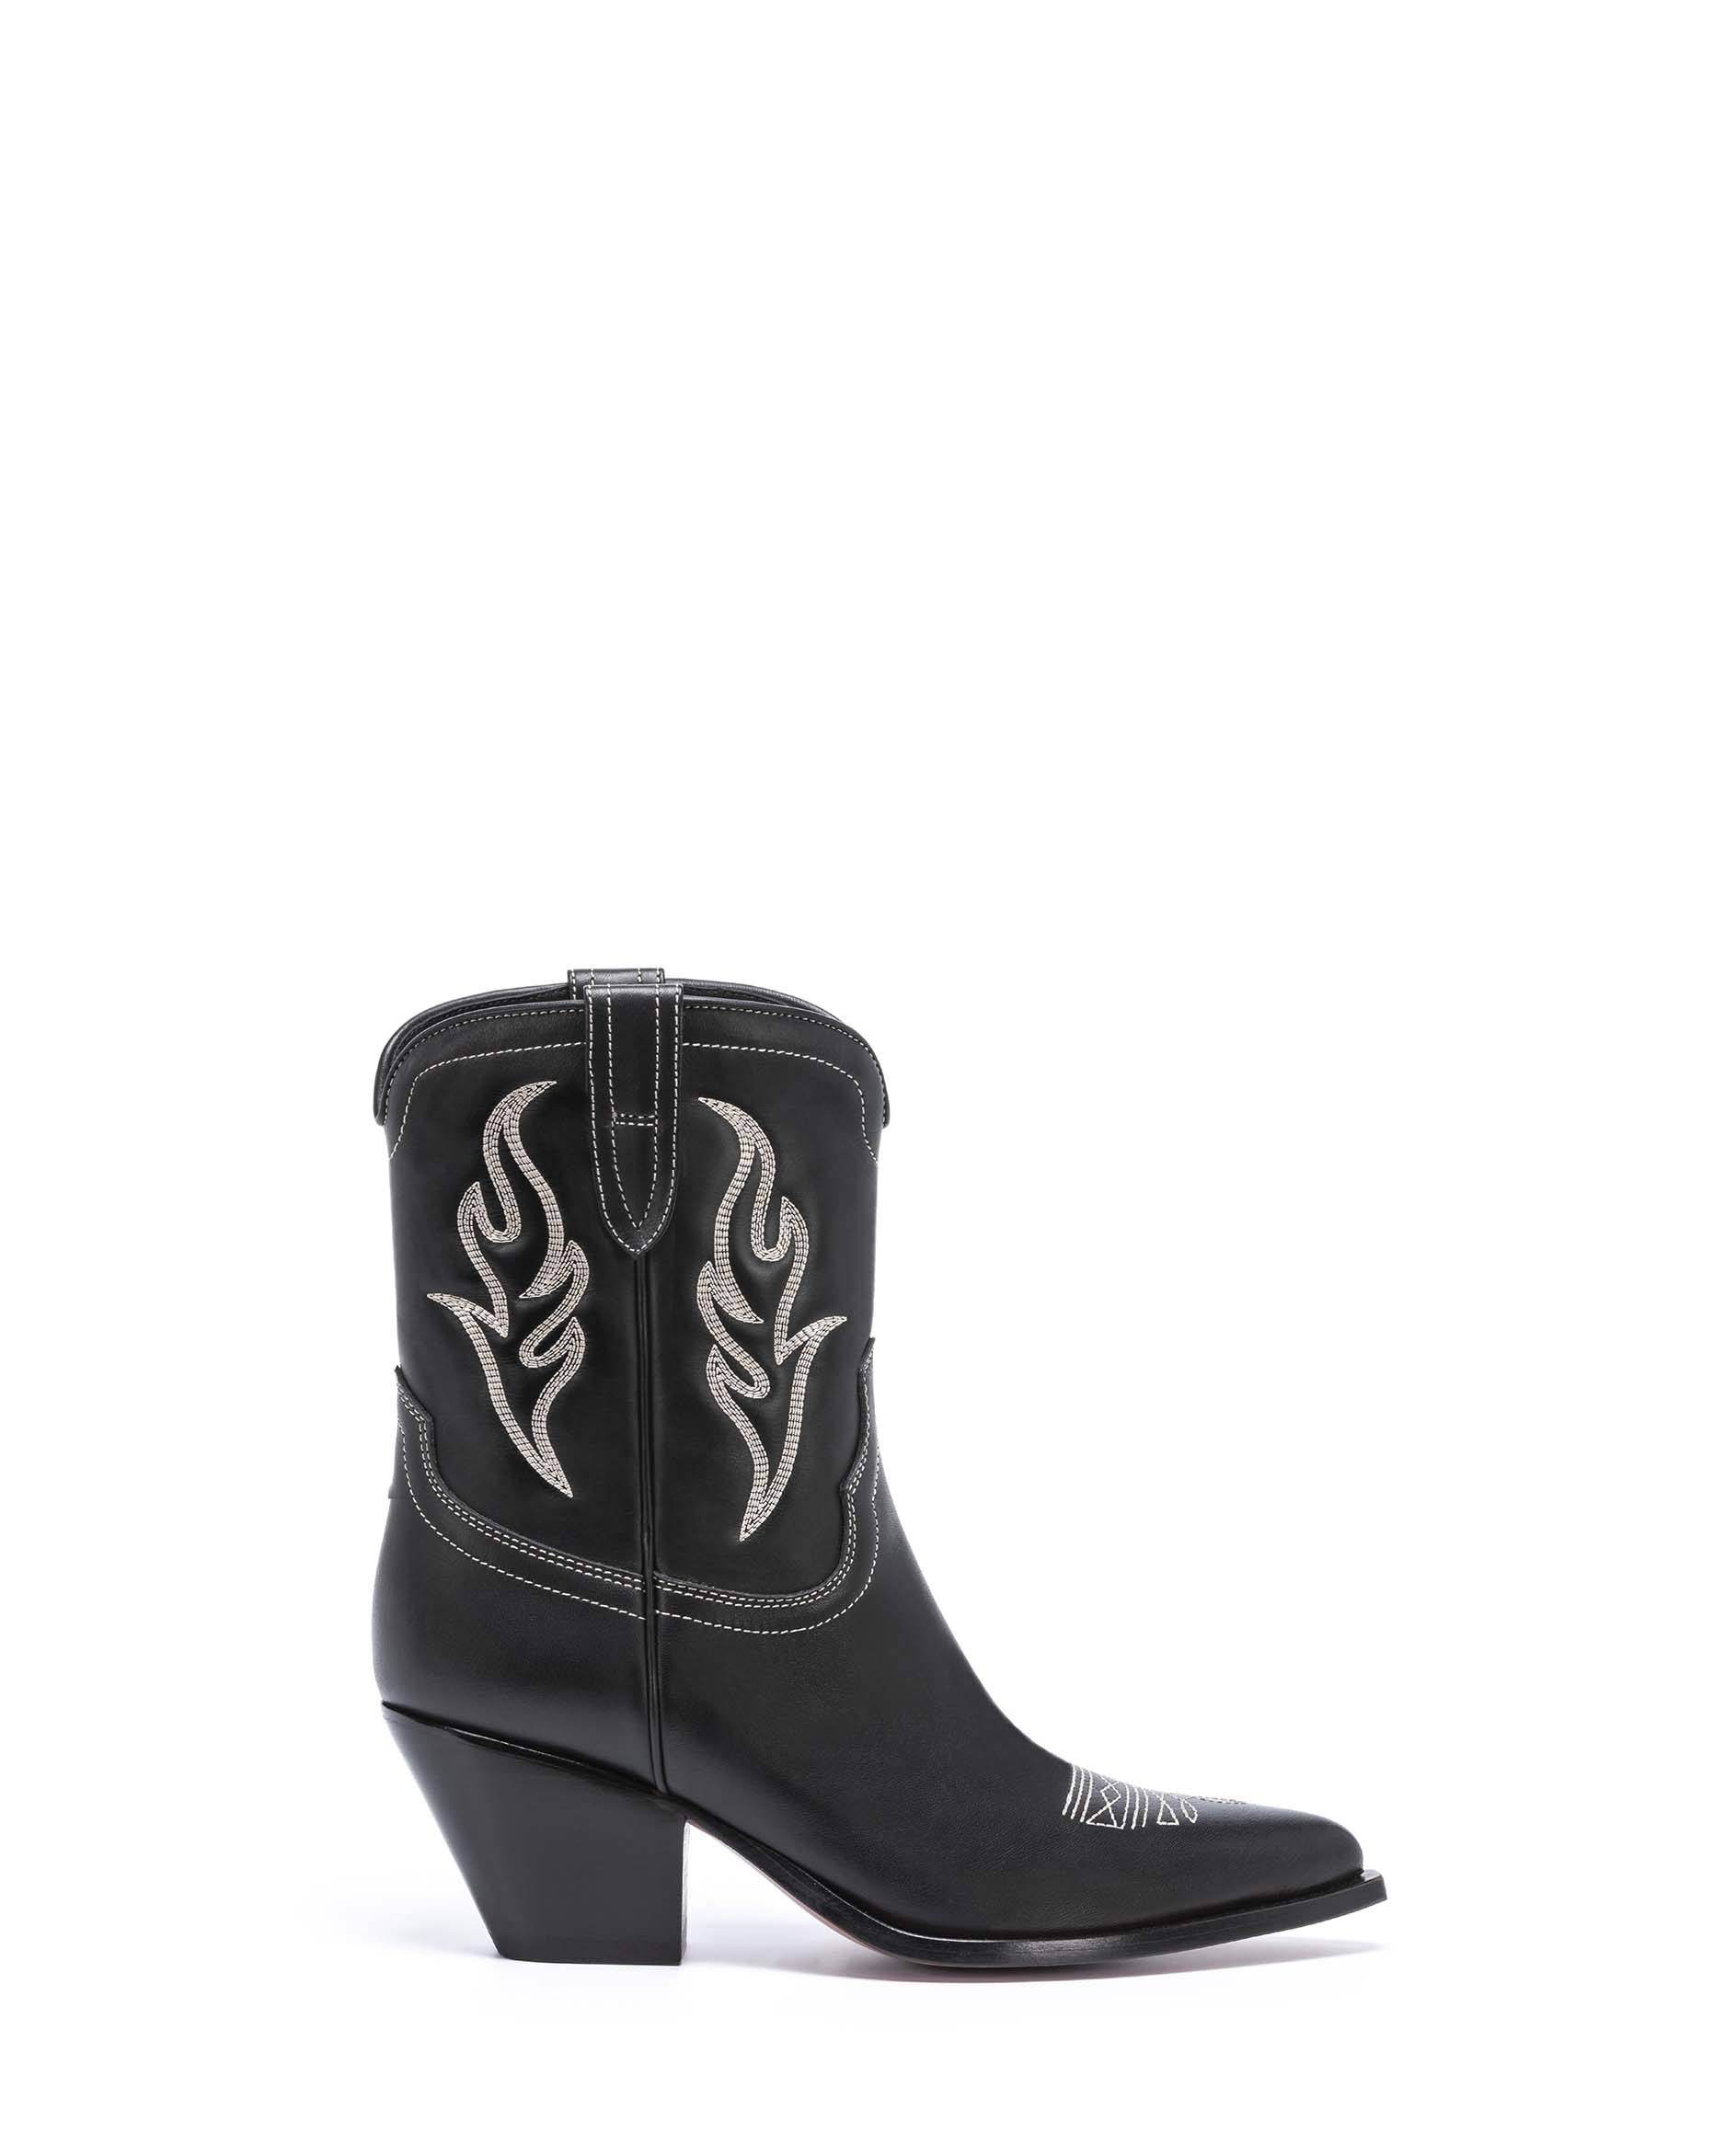 PERLA Women's Ankle Boots in Black Calf Leather | Off-White Embroidery_Side_01